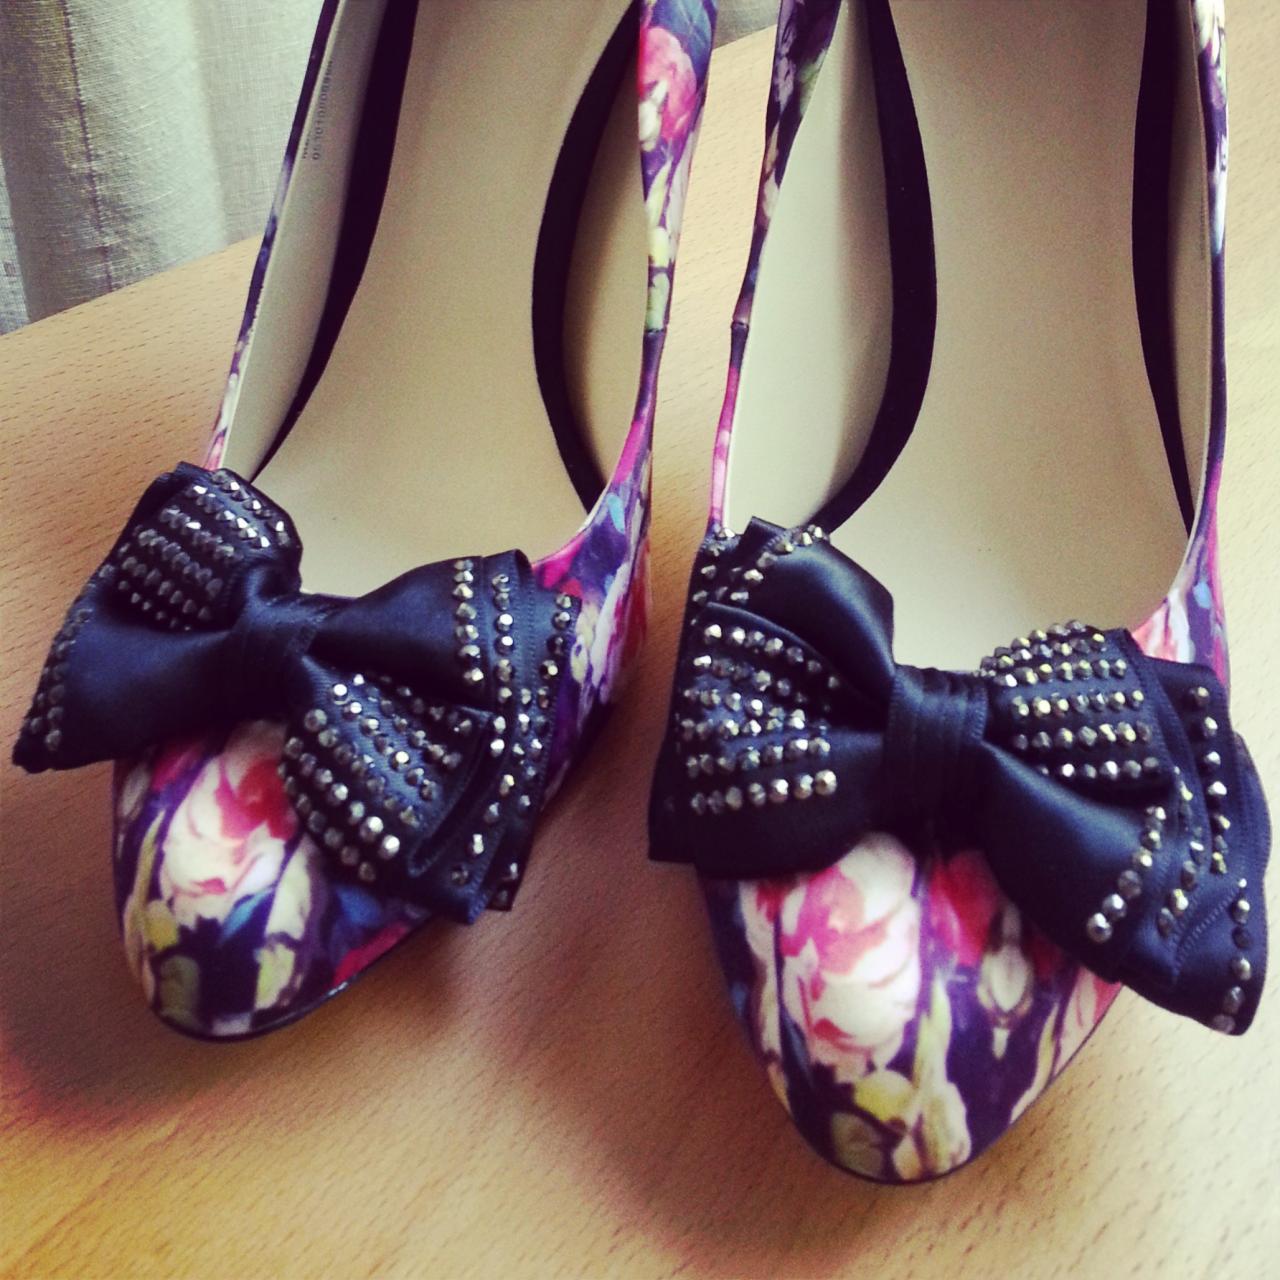 Satin Floral Heels With Black Bow Size 9 Us / 7 Uk / 40 Eu